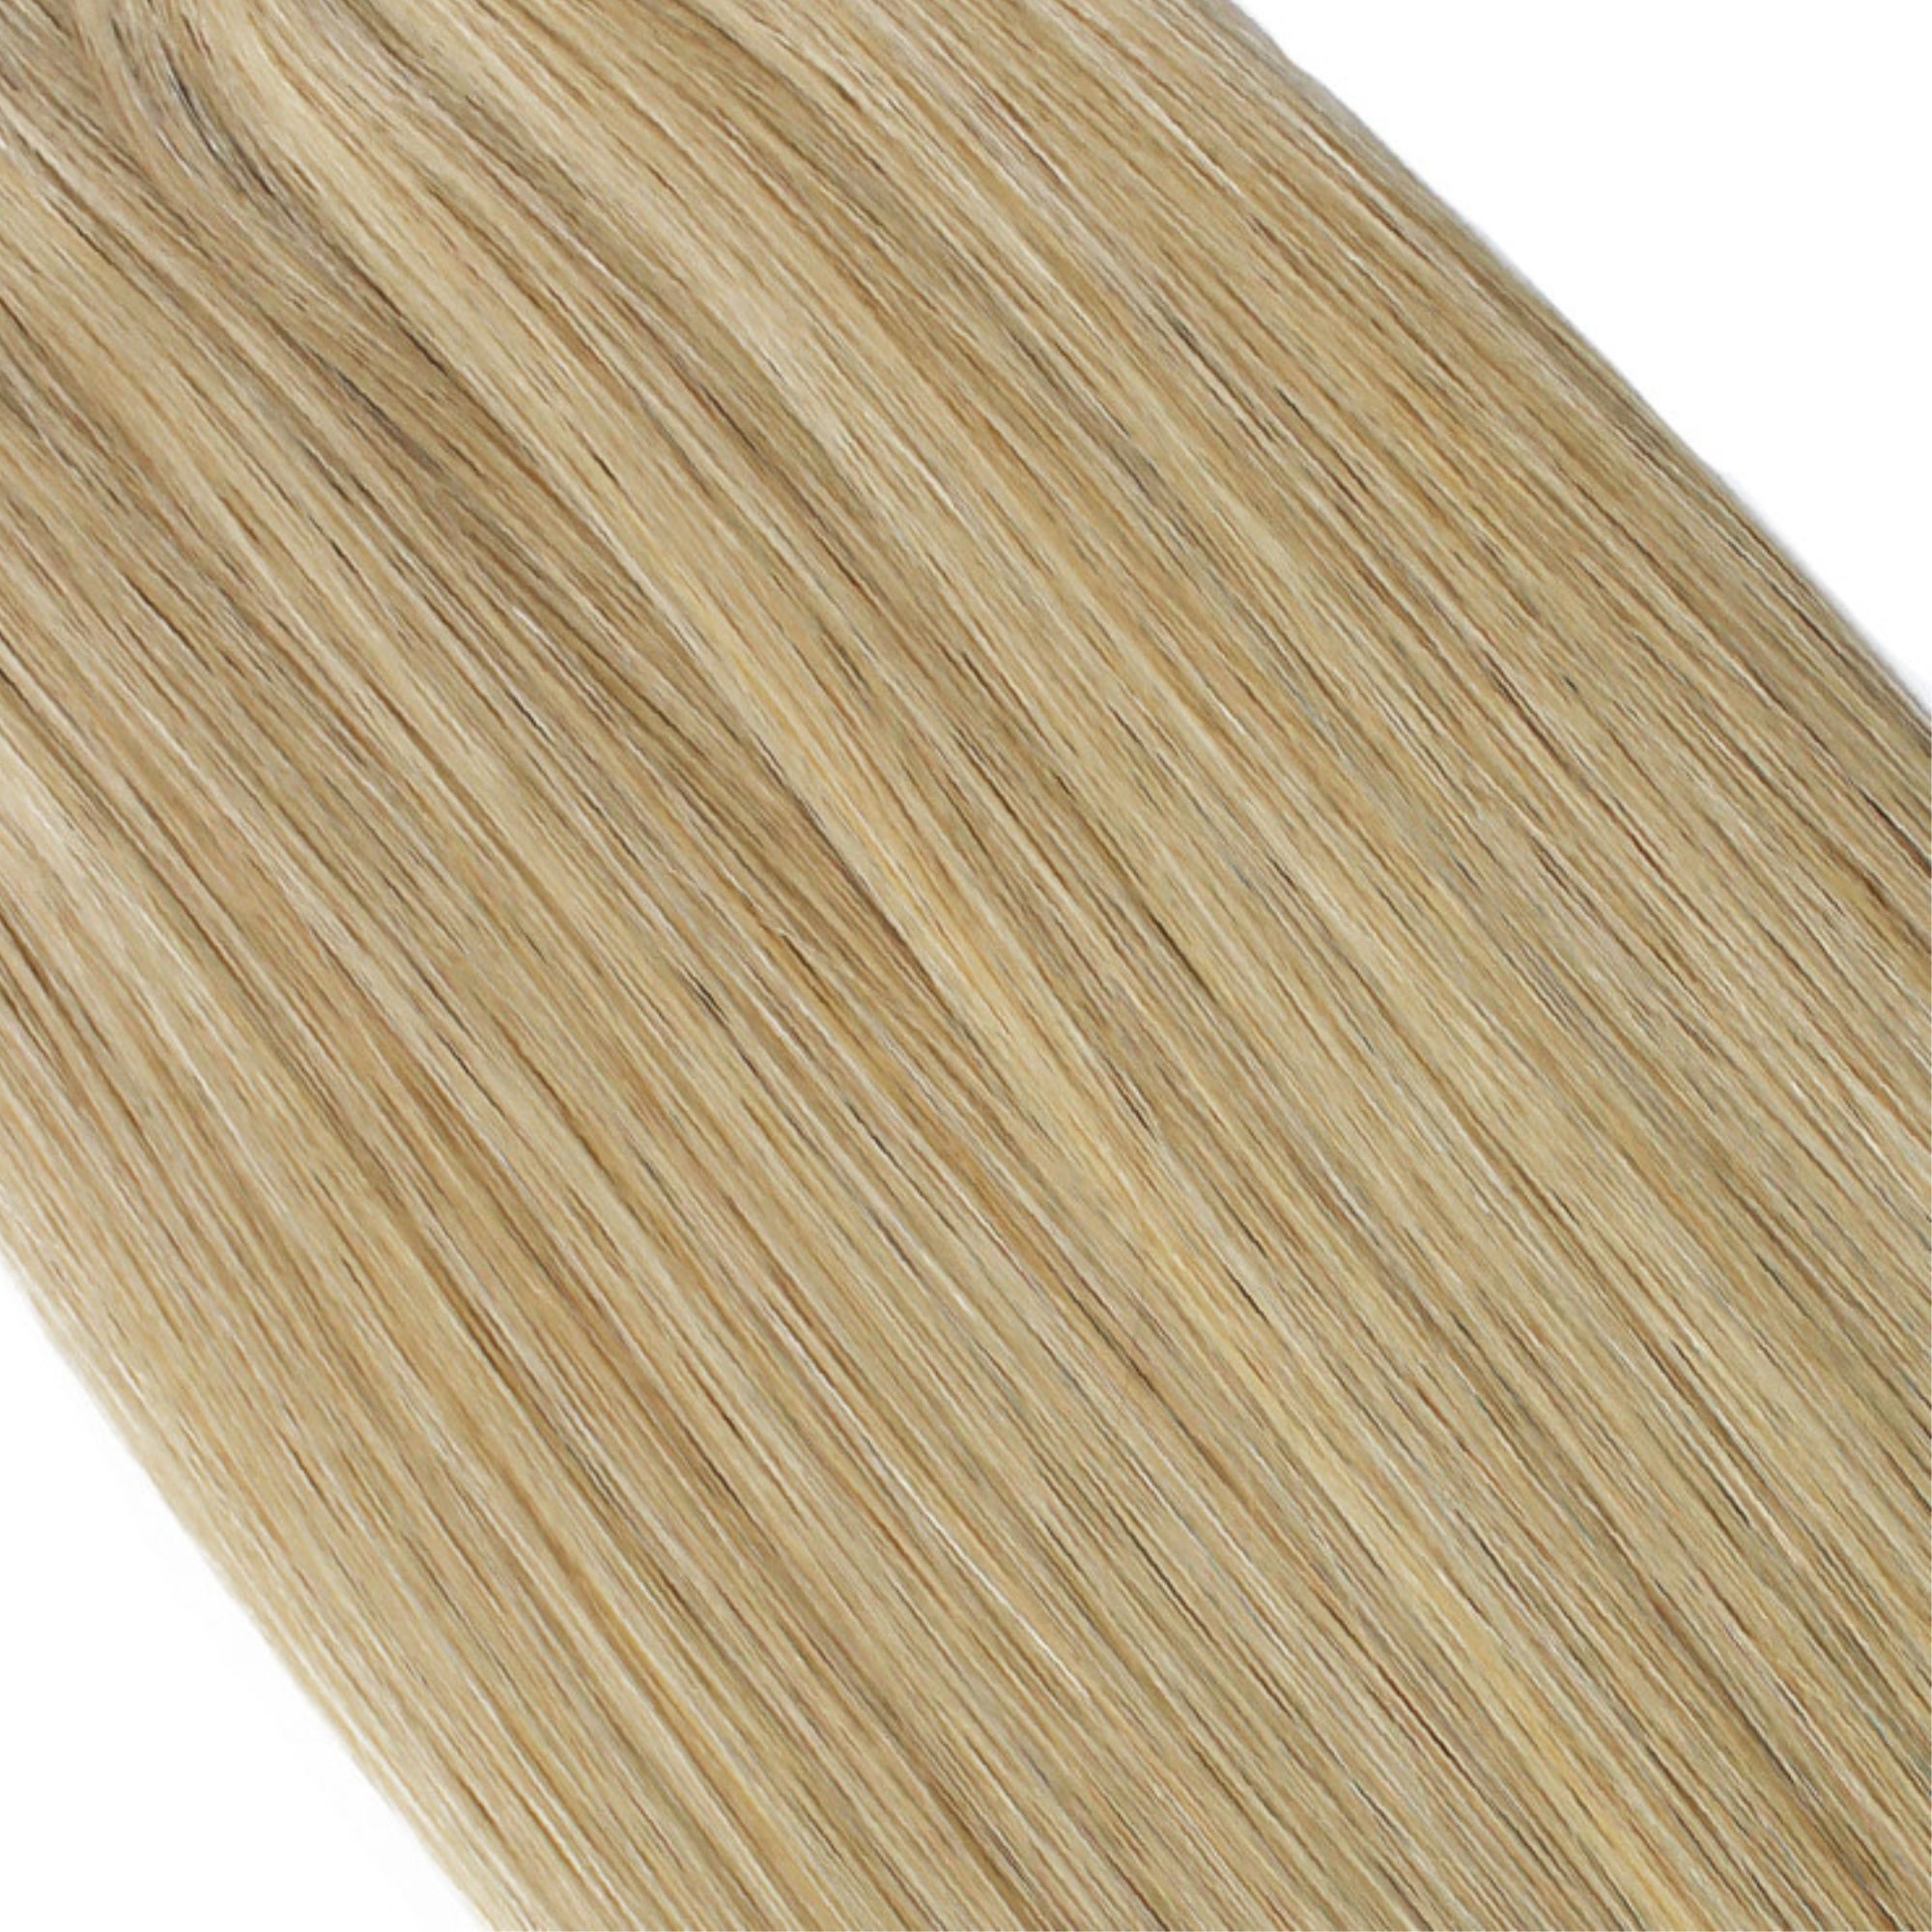 "hair rehab london 14" tape hair extensions shade swatch titled dirty blonde"